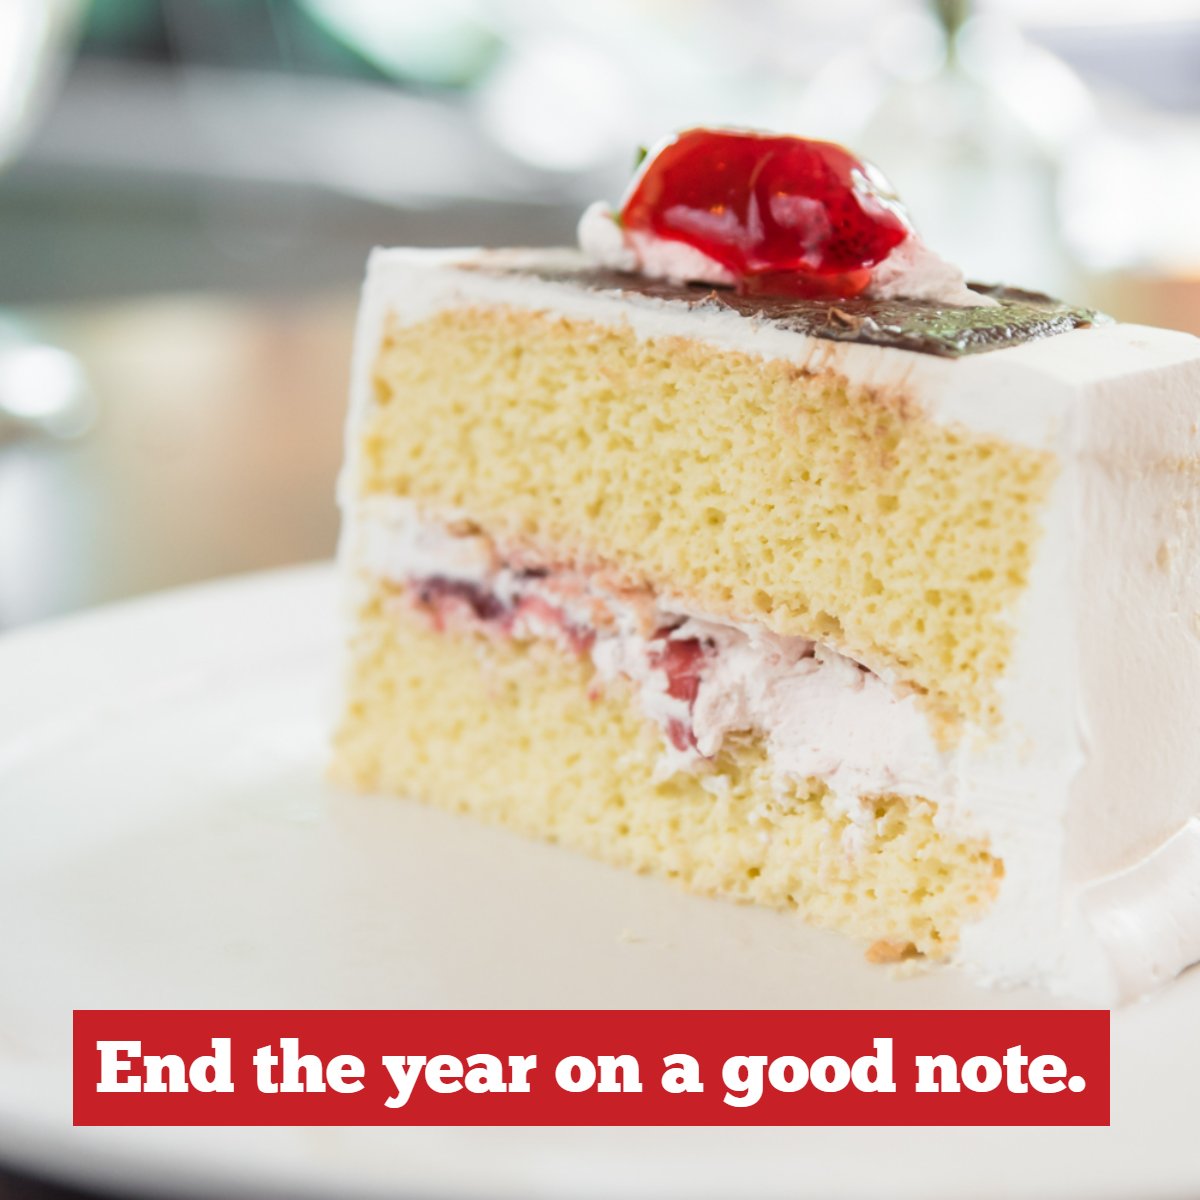 End the year on a good note! You can't go into 2023 without another bite of tres leches cake at #LunaYSolMexicanRestaurant! What's one item on our menu you have to have before New Year's Day?